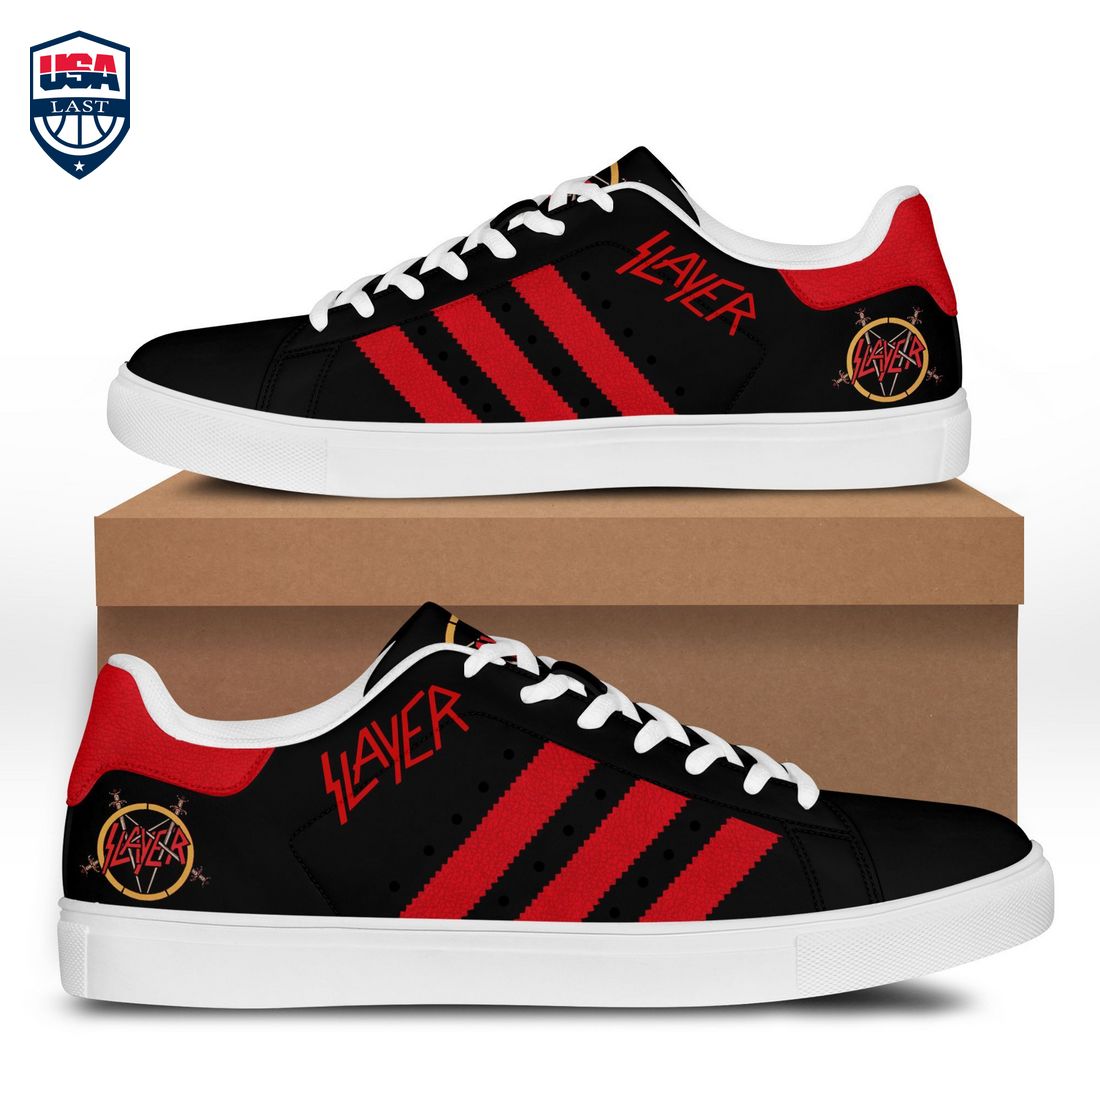 slayer-red-stripes-stan-smith-low-top-shoes-1-9LhGe.jpg